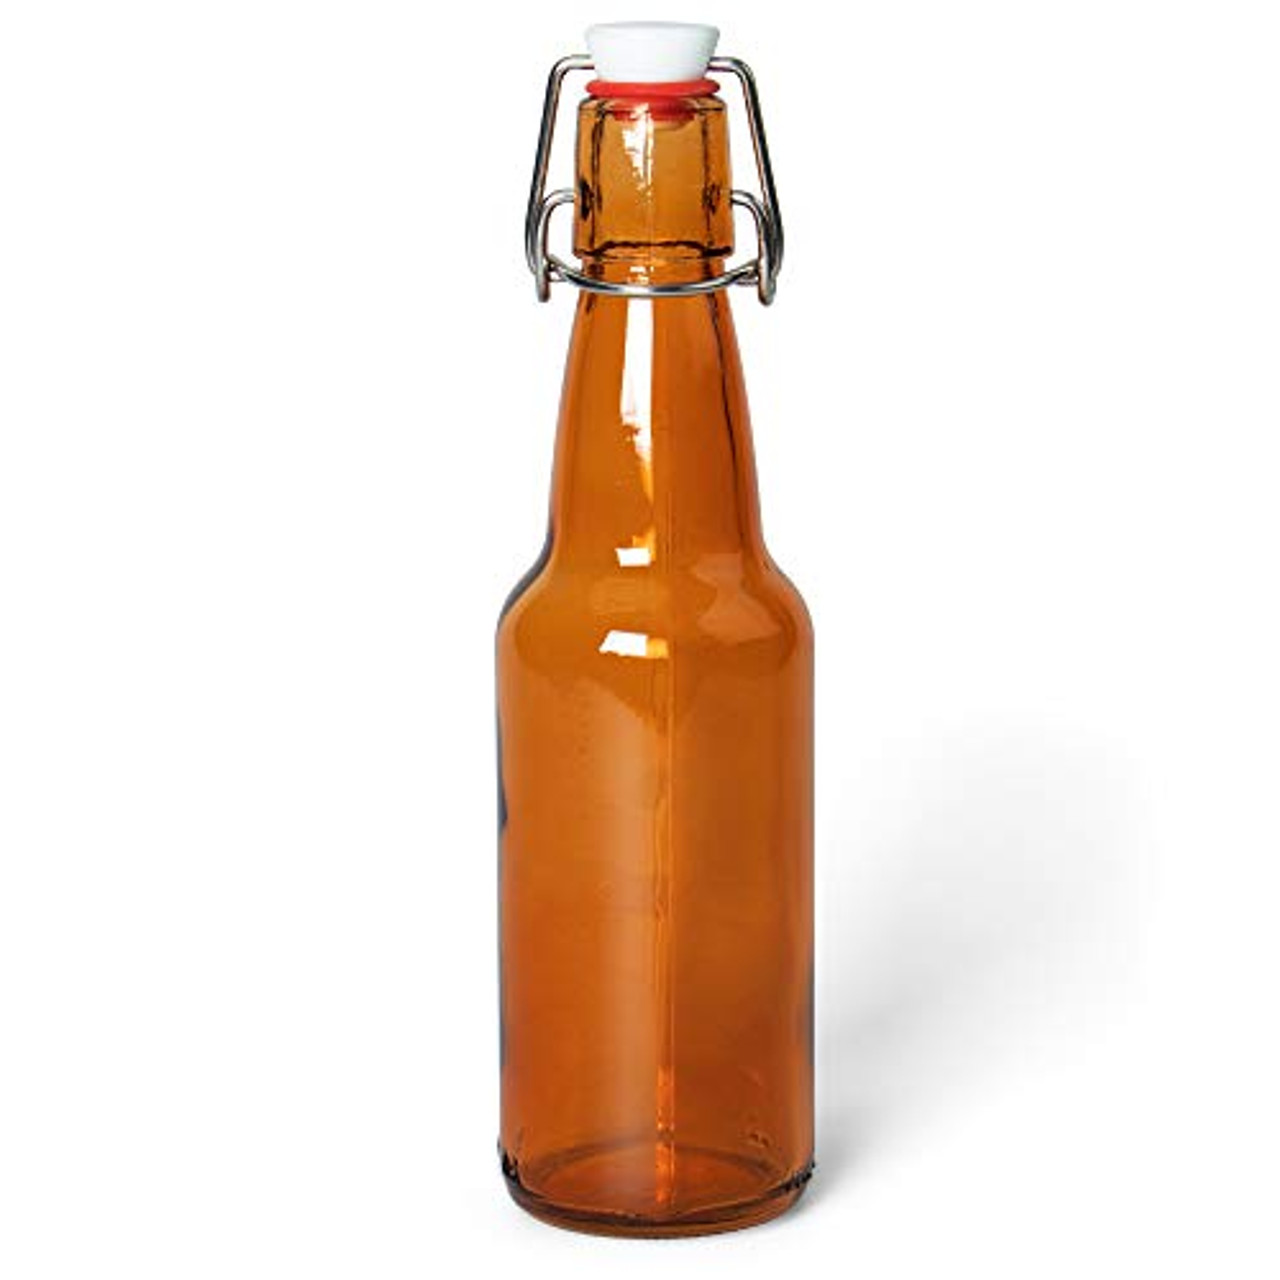 12 Pack of Glass Beer Bottles for Home Brewing - Square 8 oz